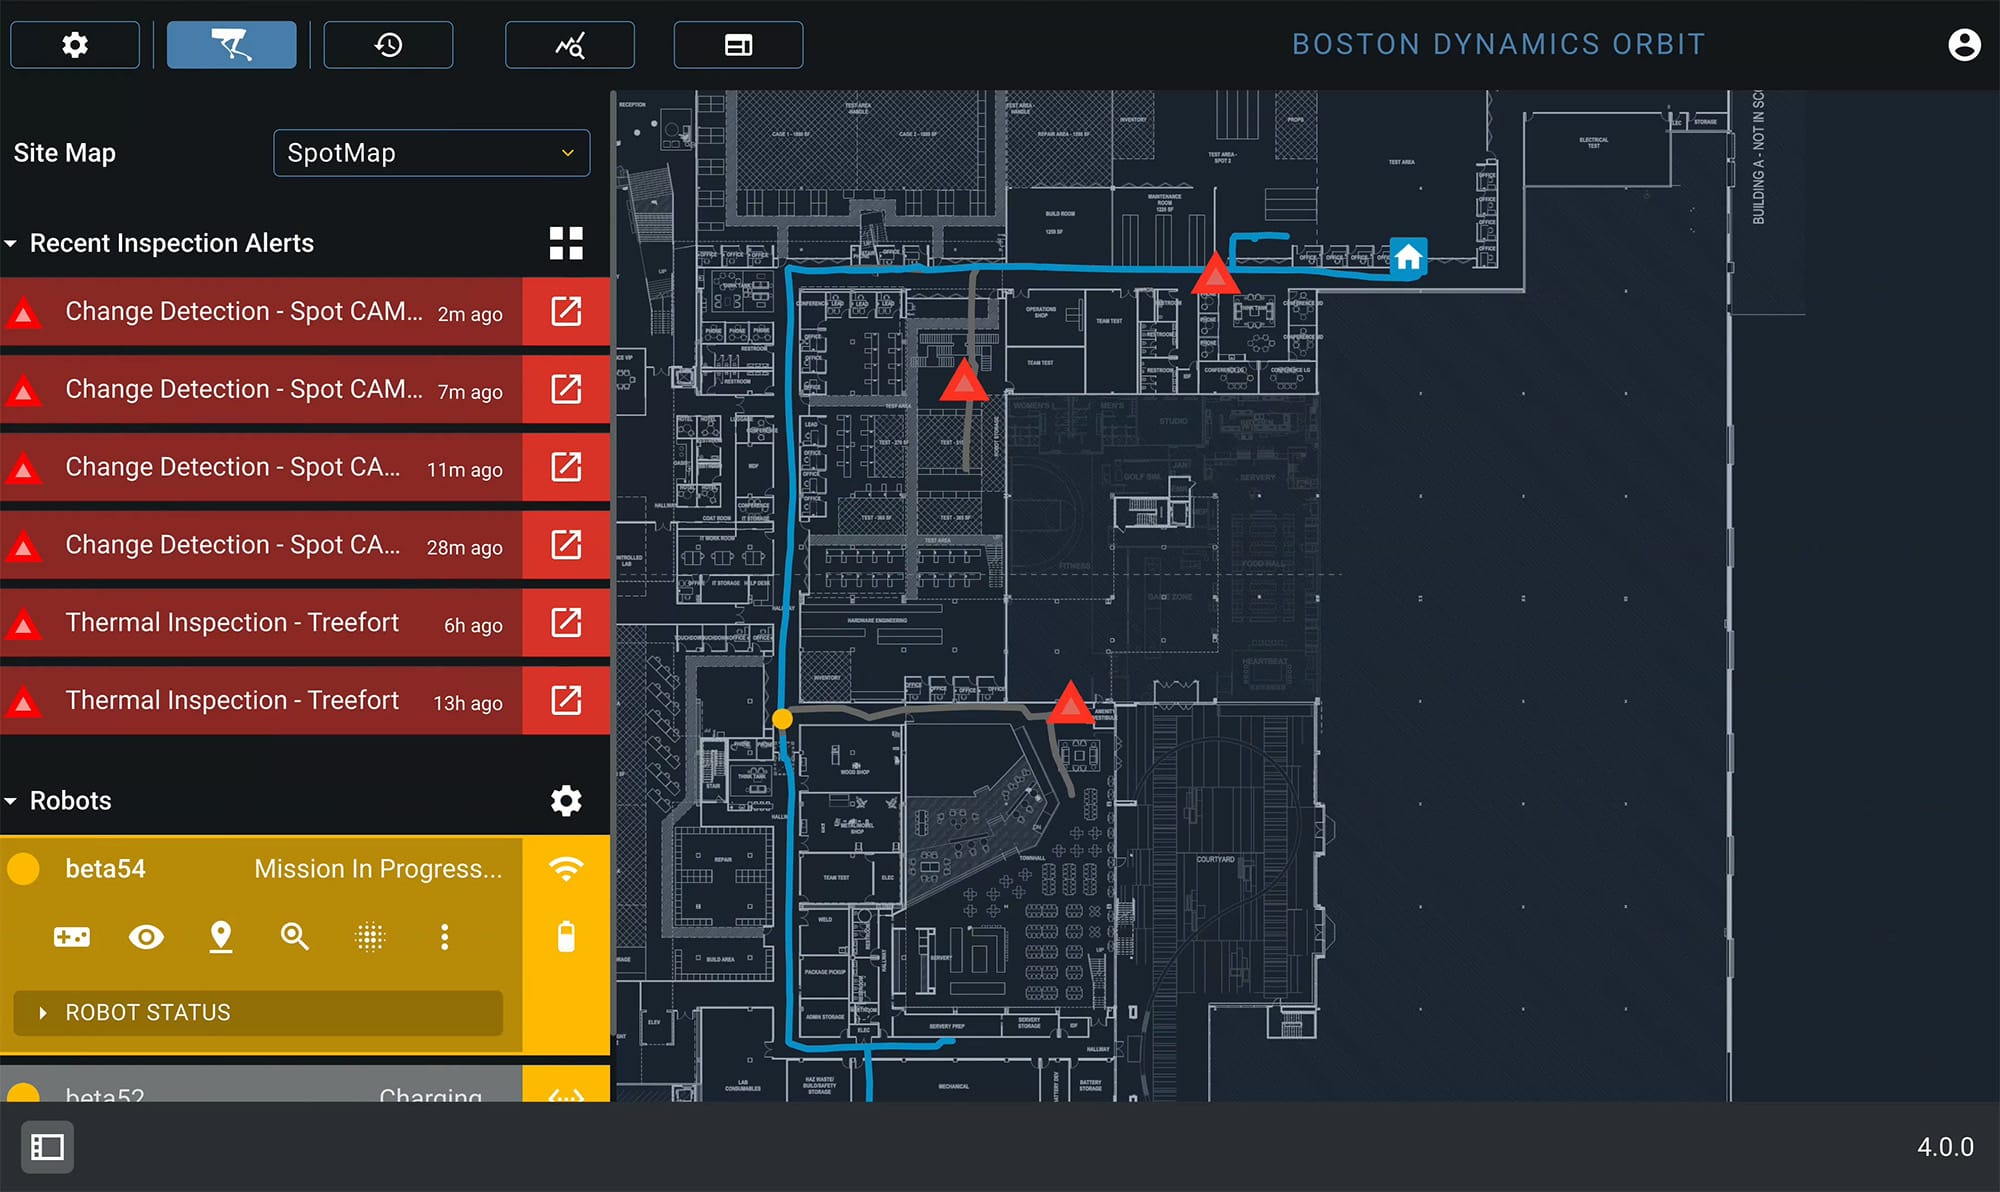 A screenshot of Orbit showing an inspection route on a site blueprint and alerts